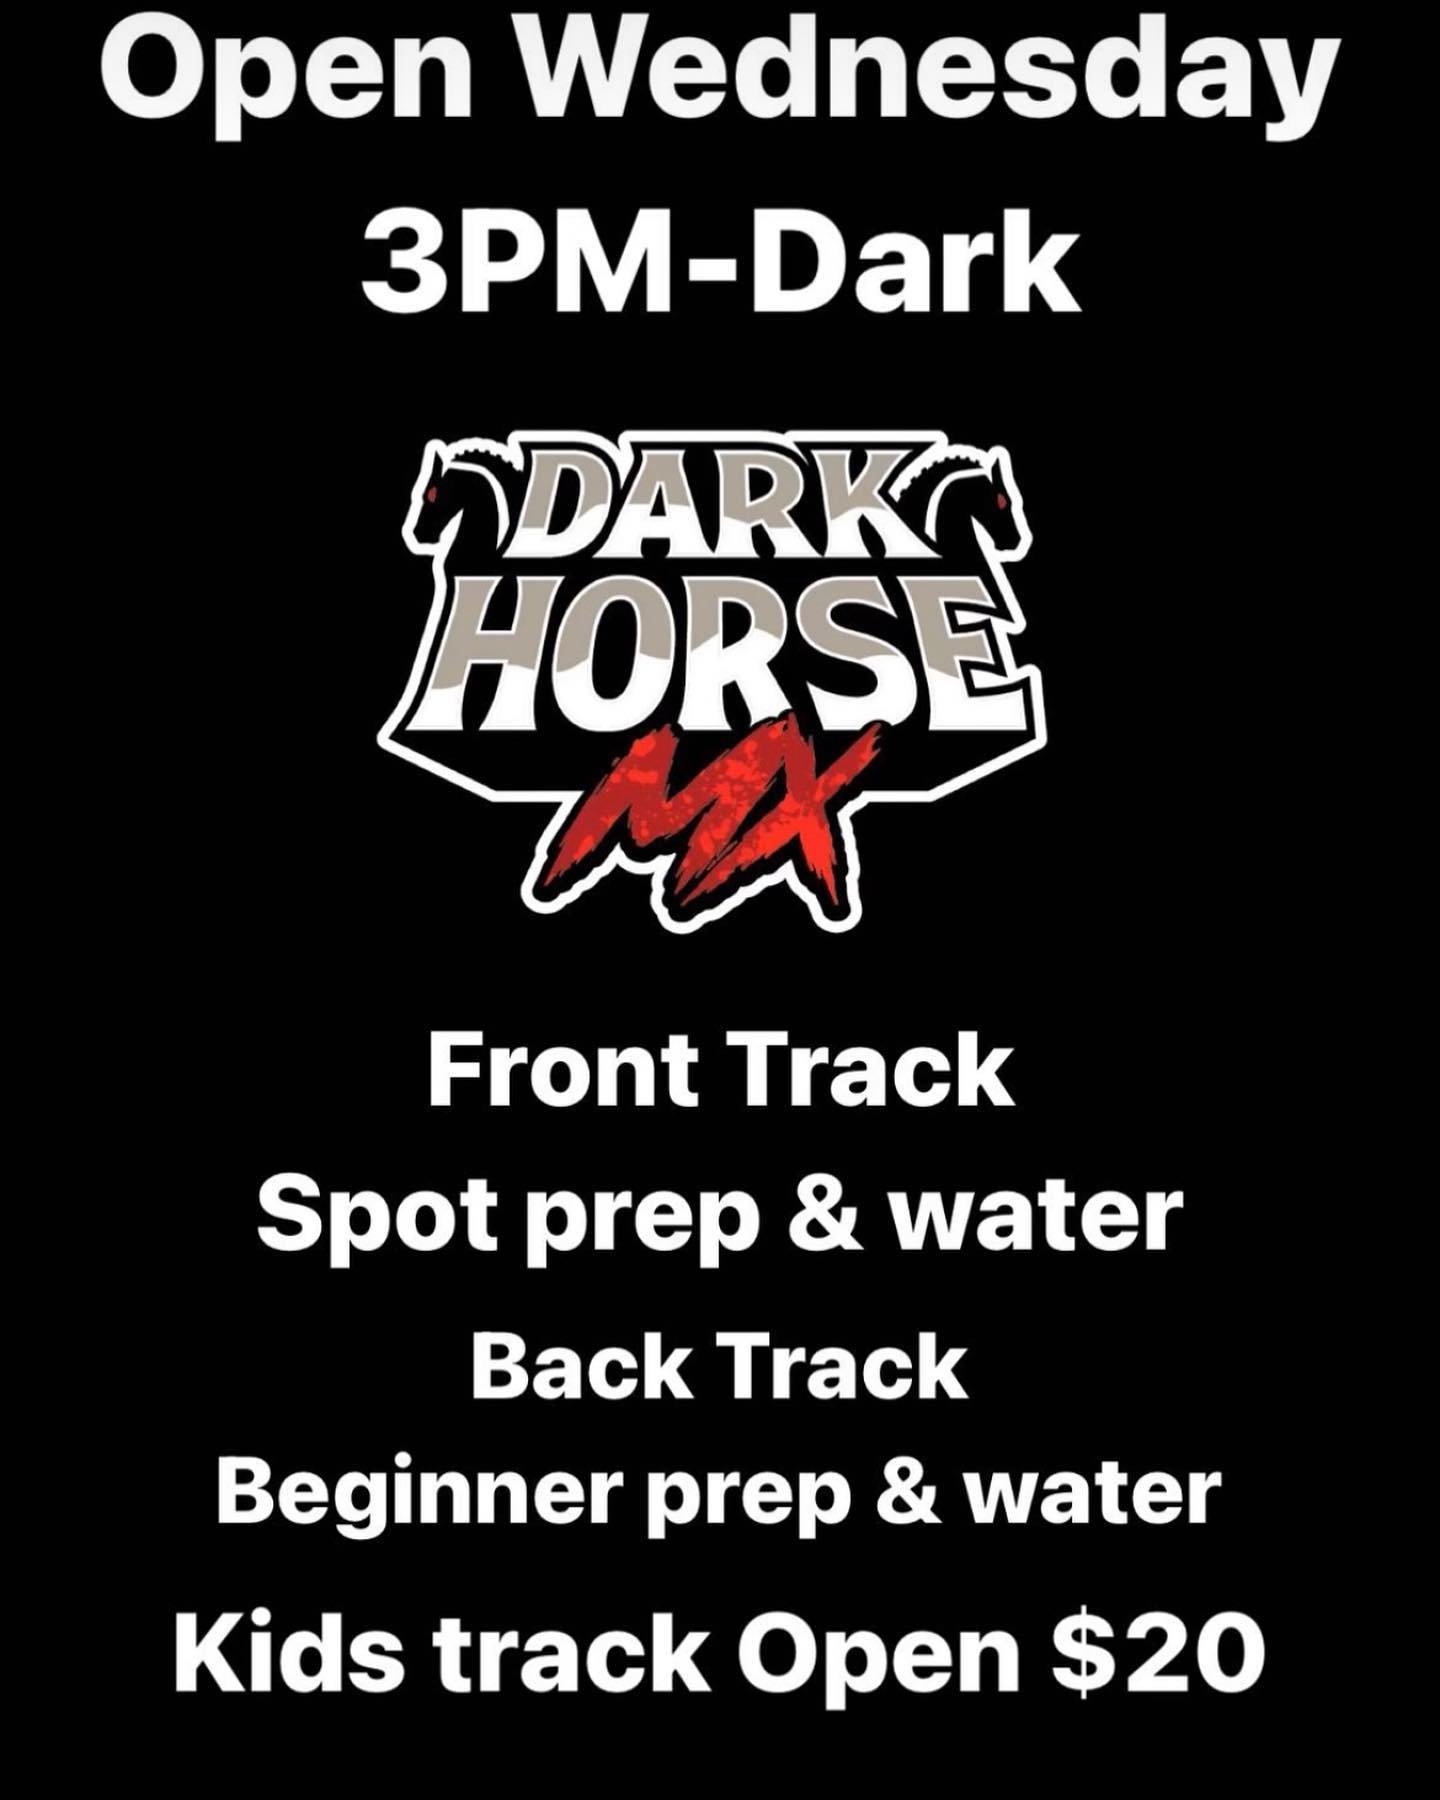 Come ride with us Wednesday! Tracks will be in great shape! Don&rsquo;t forget we are cash only